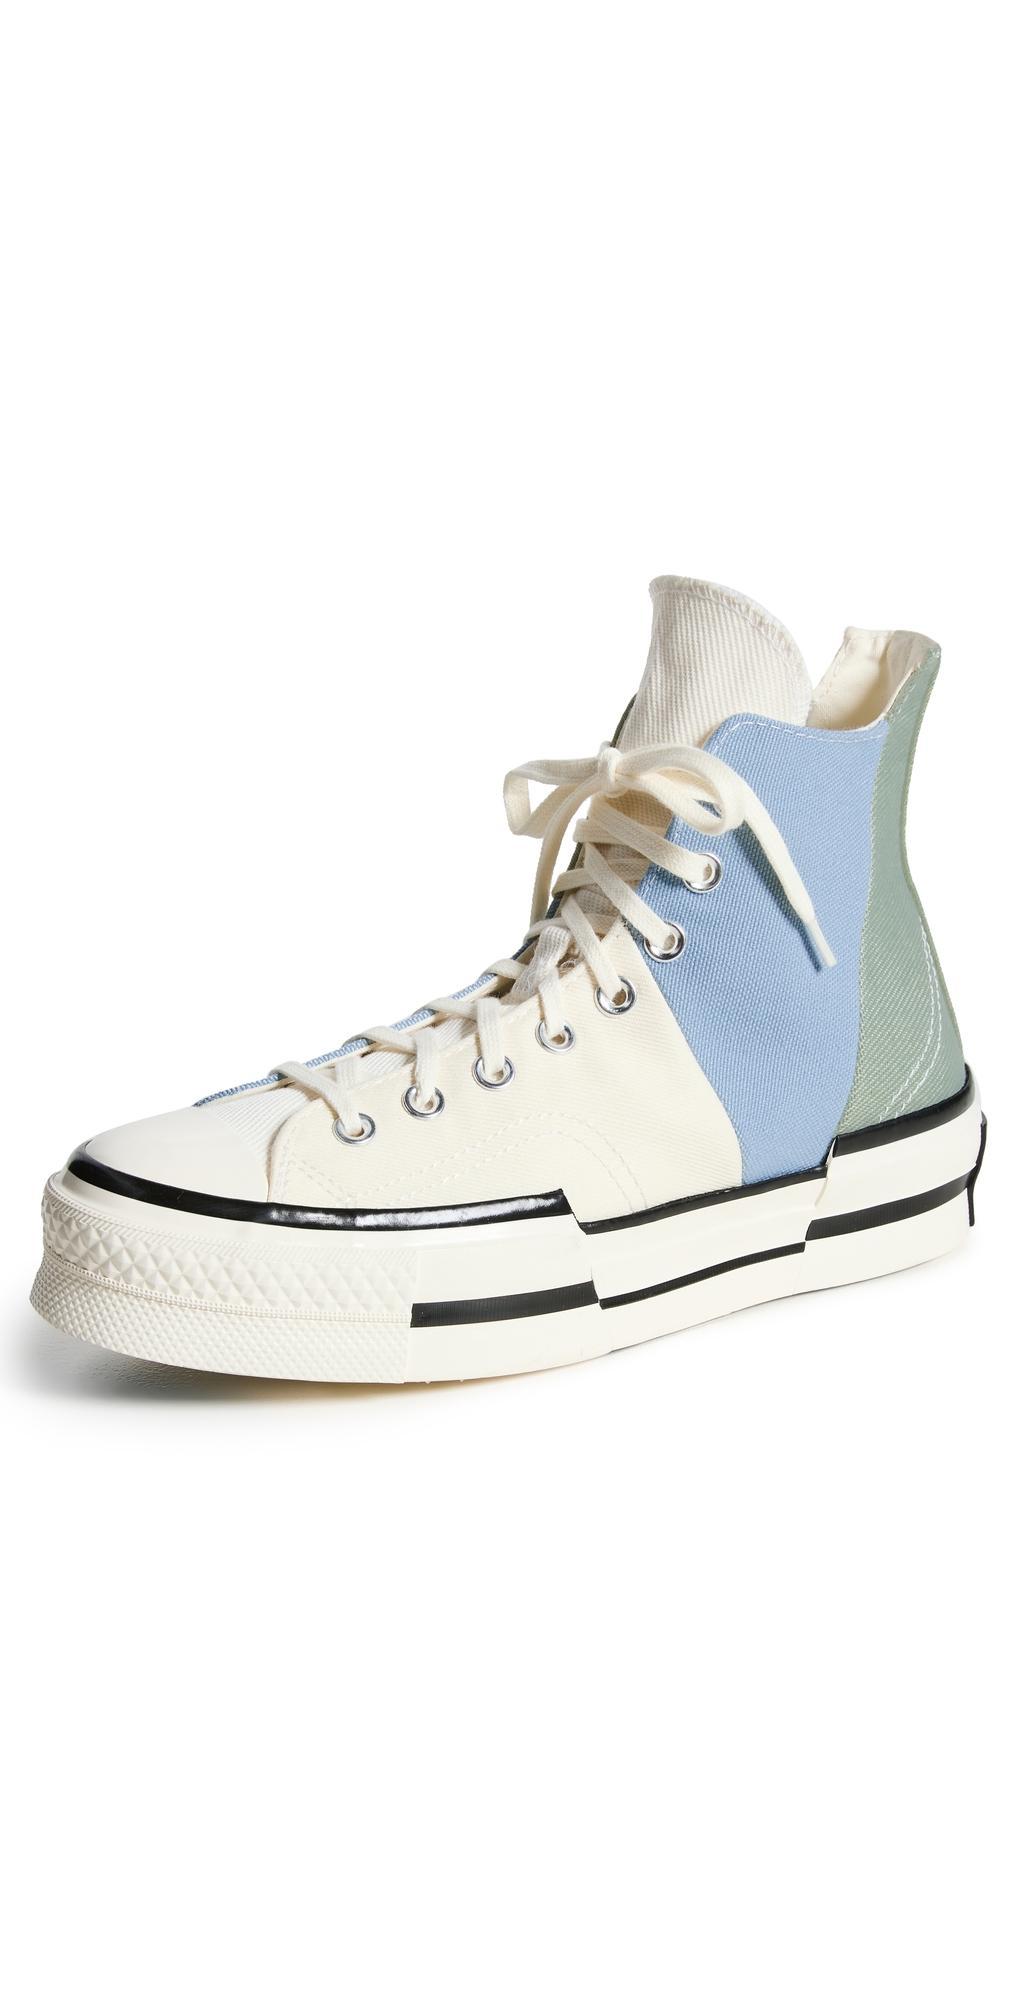 Converse Chuck Taylor All Star 70 Plus High Top Sneaker Product Image